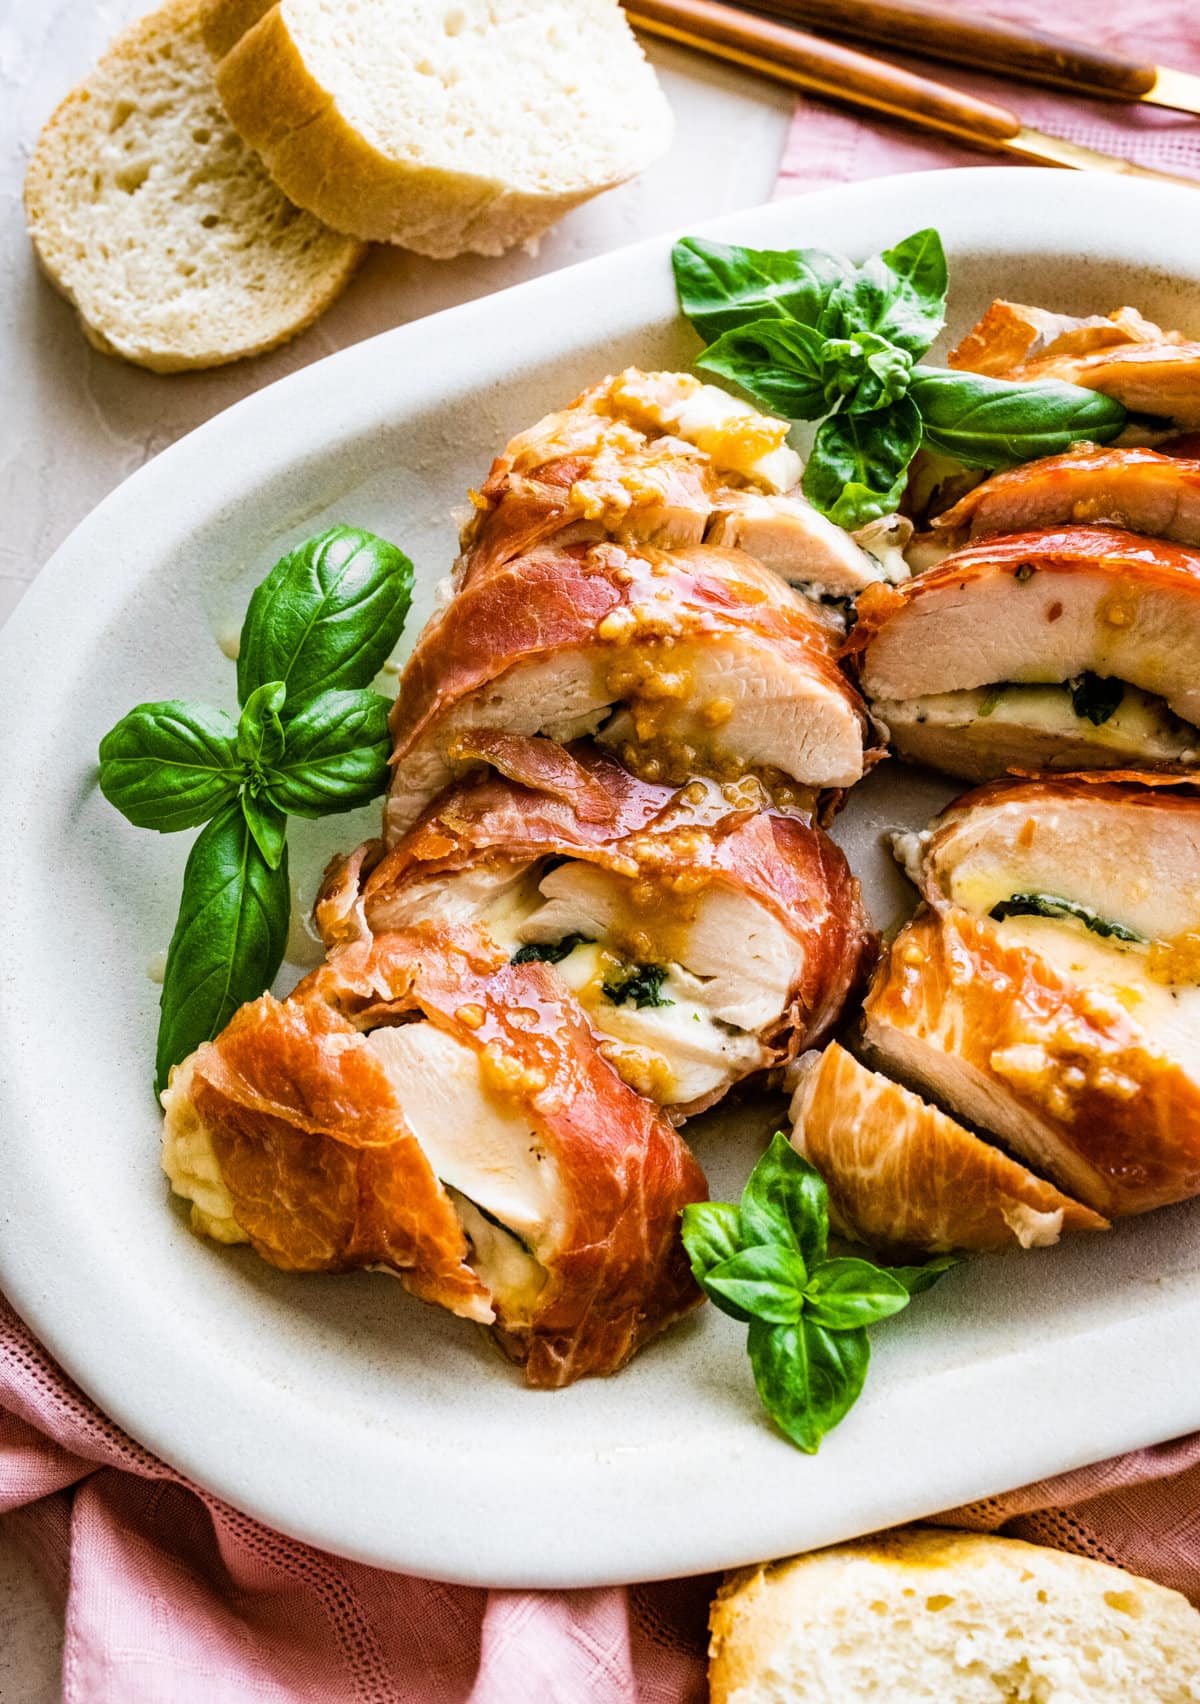 How to make Mozzarella stuffed Chicken chicken- finished stuffed chicken cut in slices and served on a white platter with fresh basil. Bread slices in background.